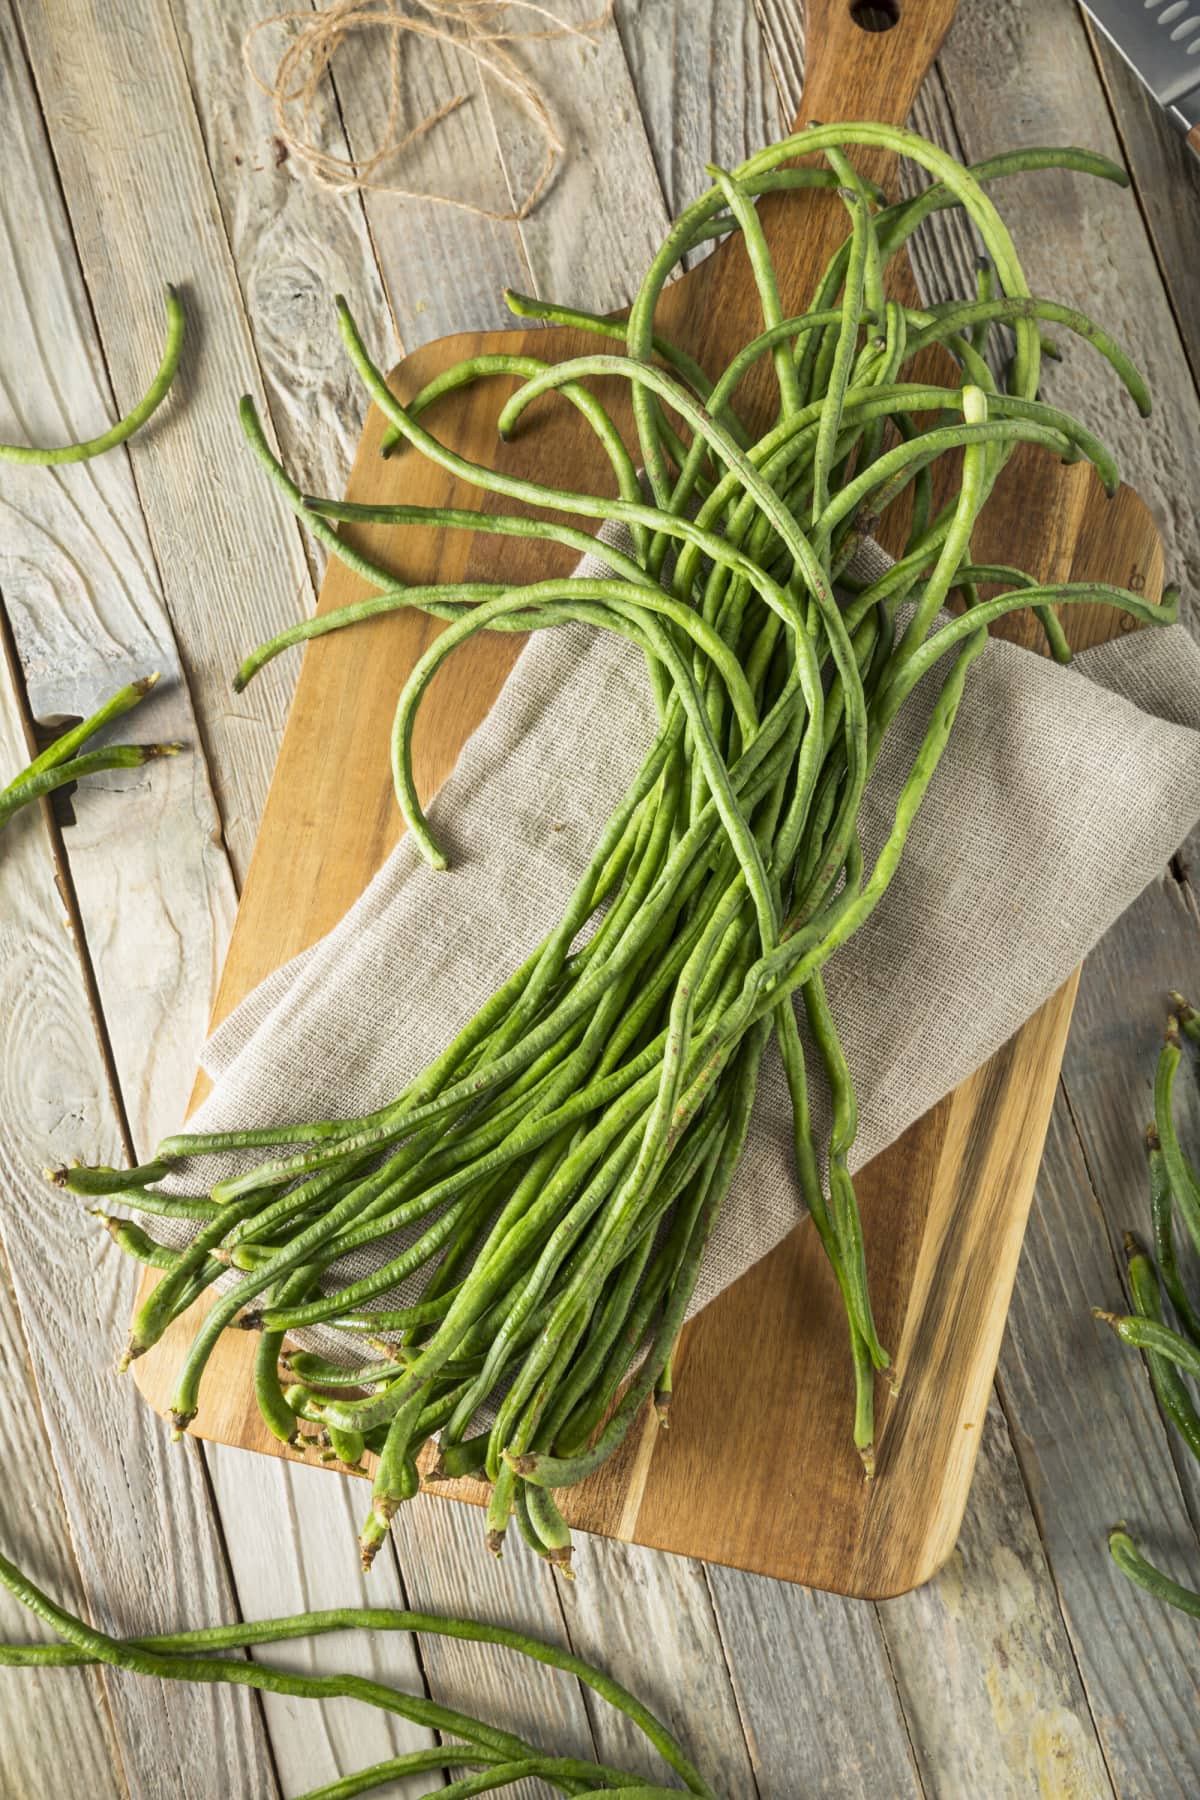 What are Yard Long Beans? Health Benefits and How To Cook Them